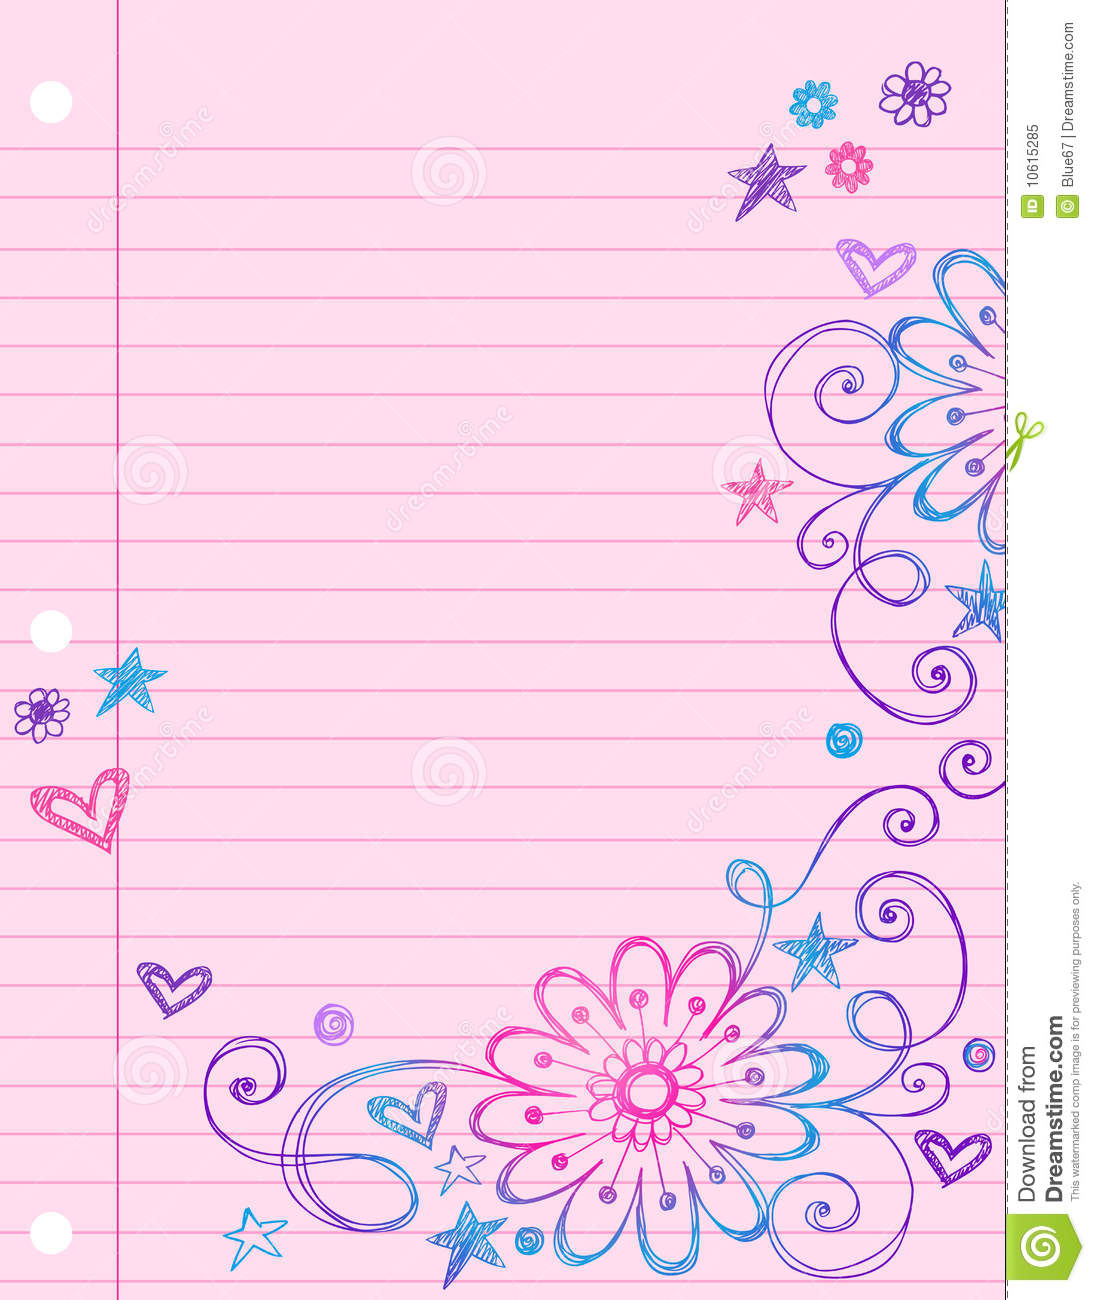 Sketchy Doodles On Notebook Paper Vector Royalty Free Stock Photo    